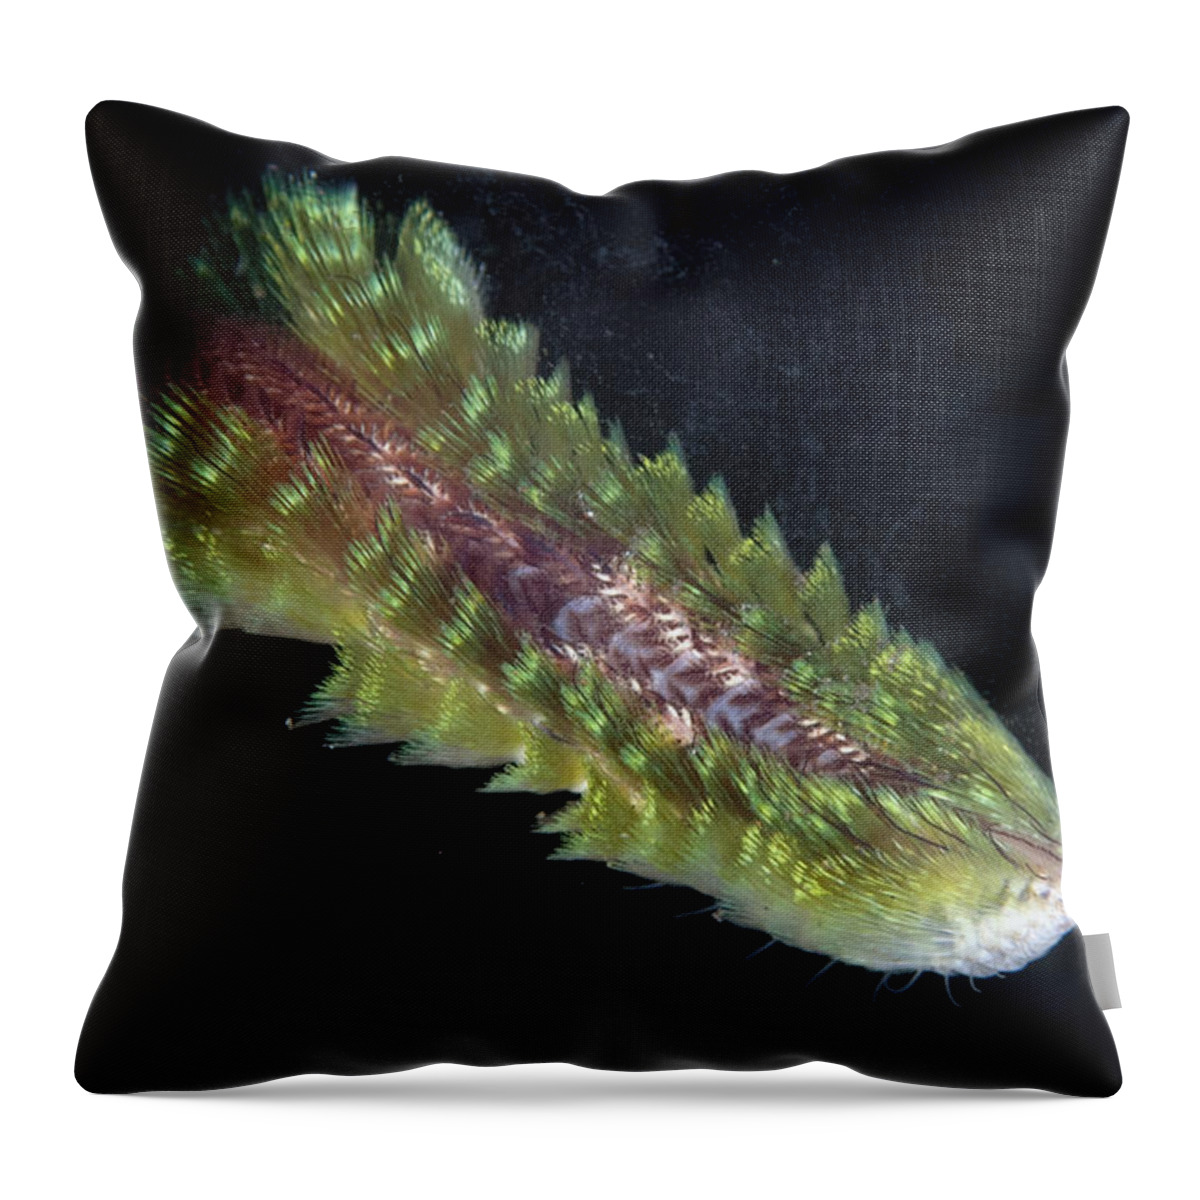 Flpa Throw Pillow featuring the photograph Dark-lined Fire Worm In Bali by Colin Marshall